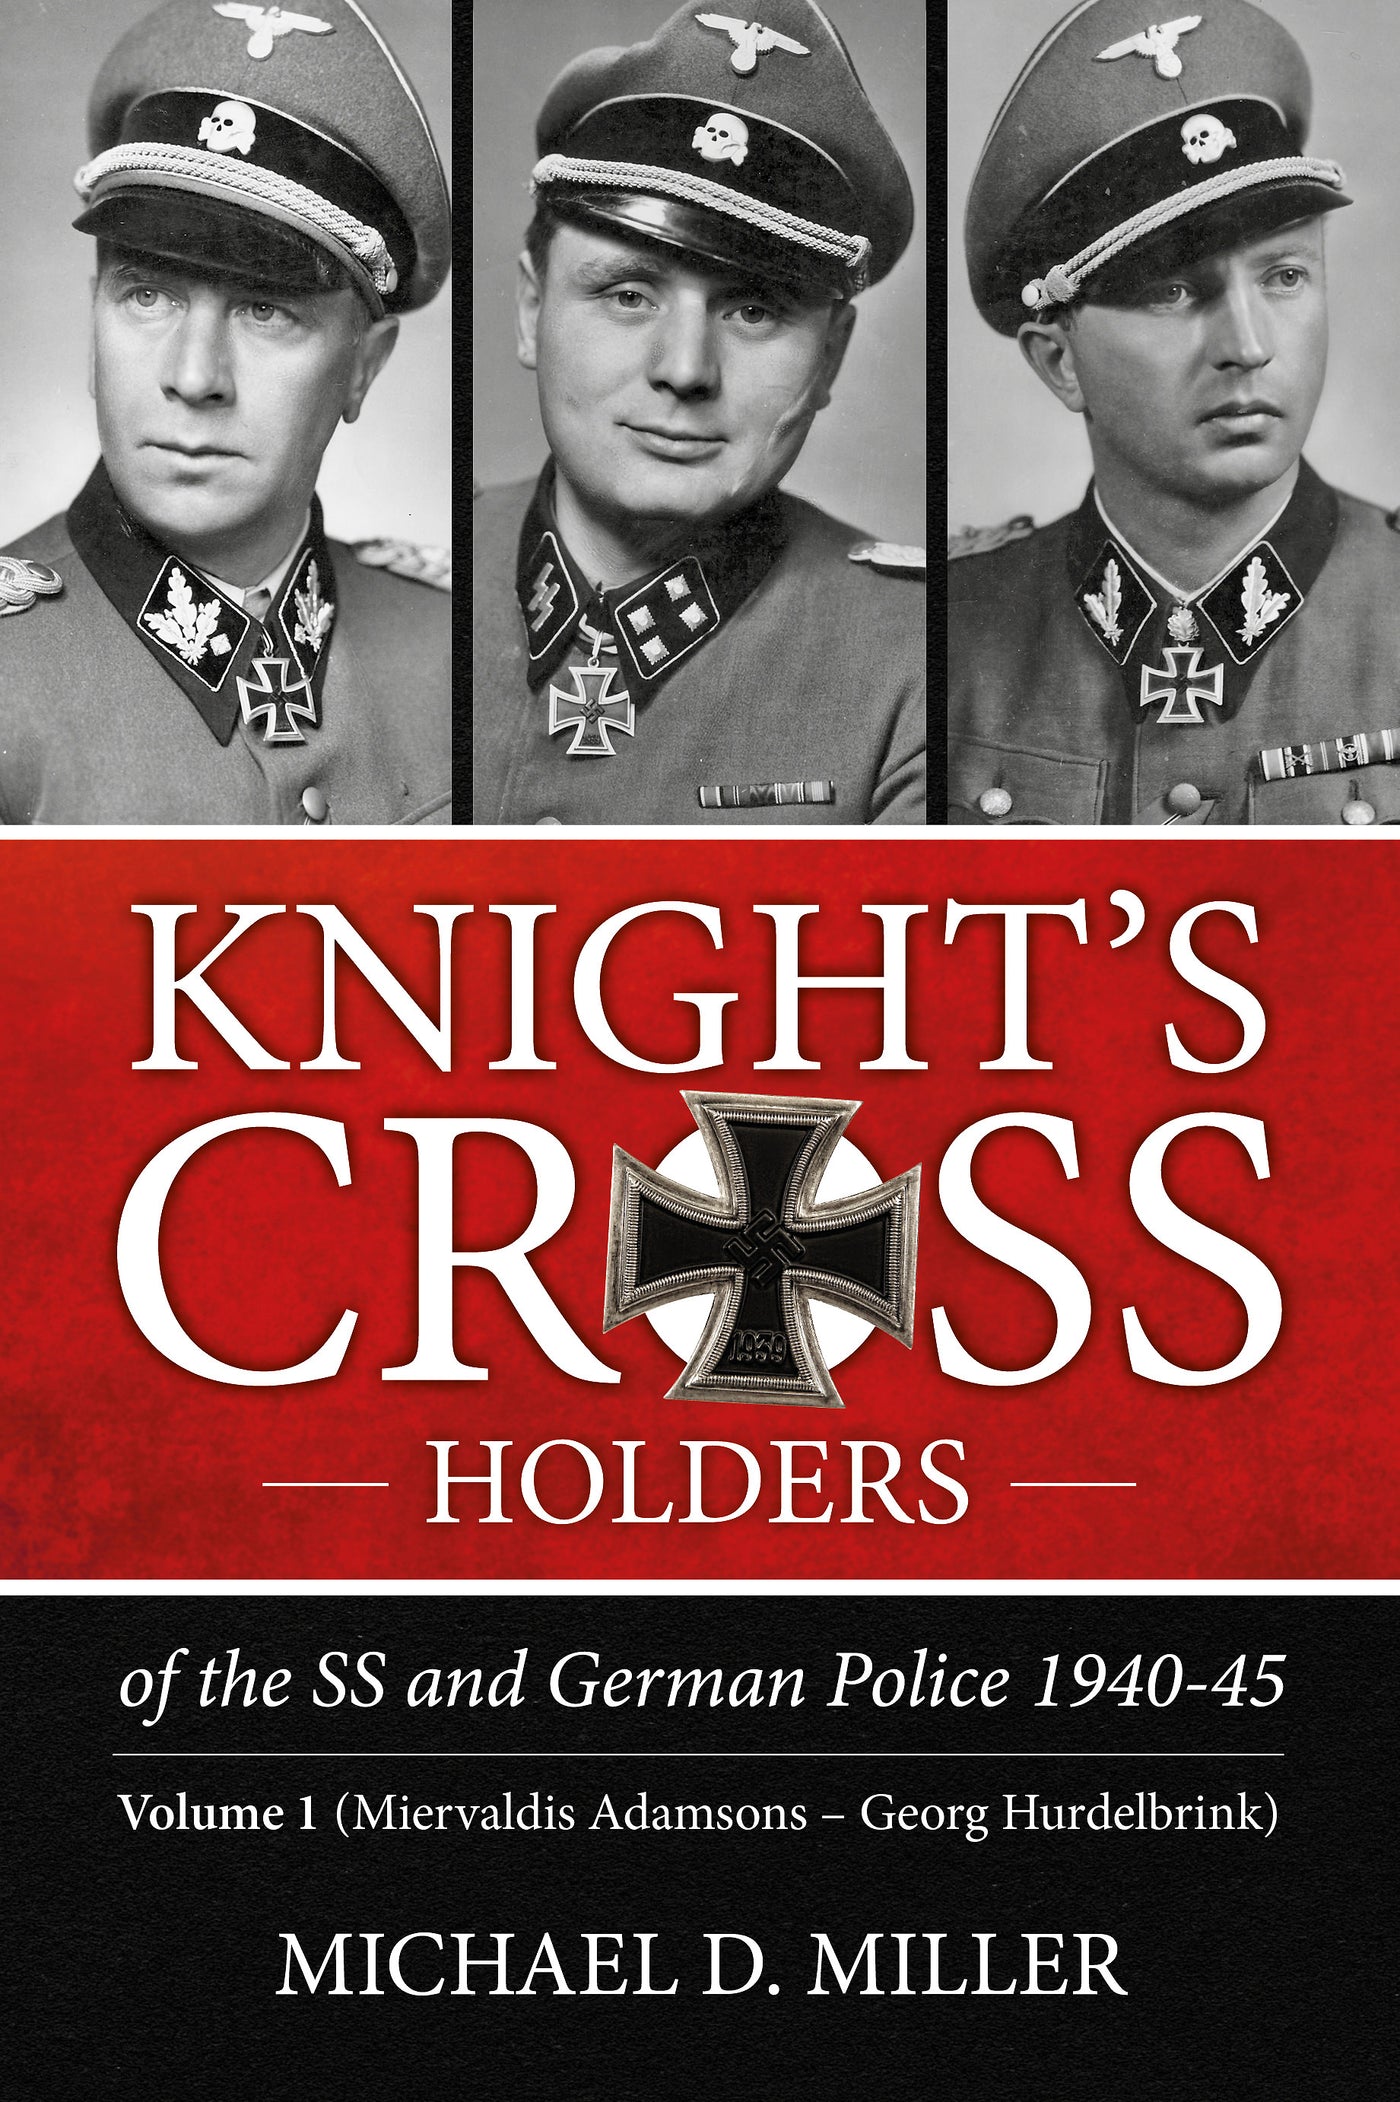 Knight’s Cross Holders of the SS and German Police 1940-45. Volume 1